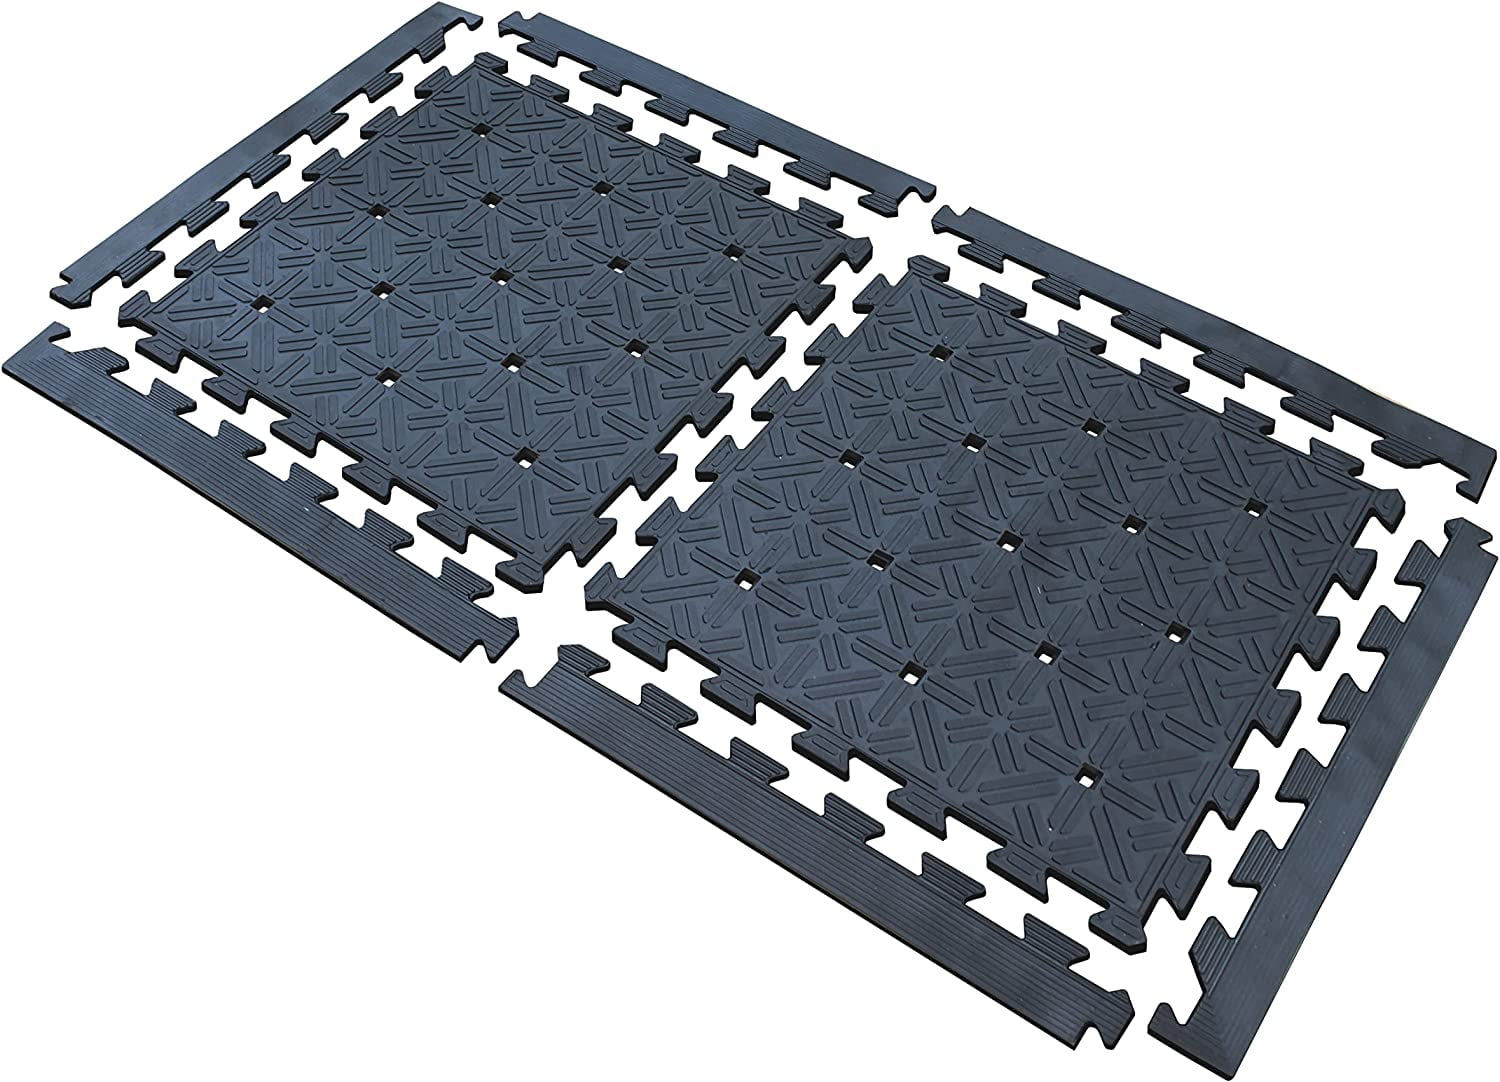 LockTough Interlocking Rubber Gym Tiles are Rubber Puzzle Tiles by American Floor  Mats